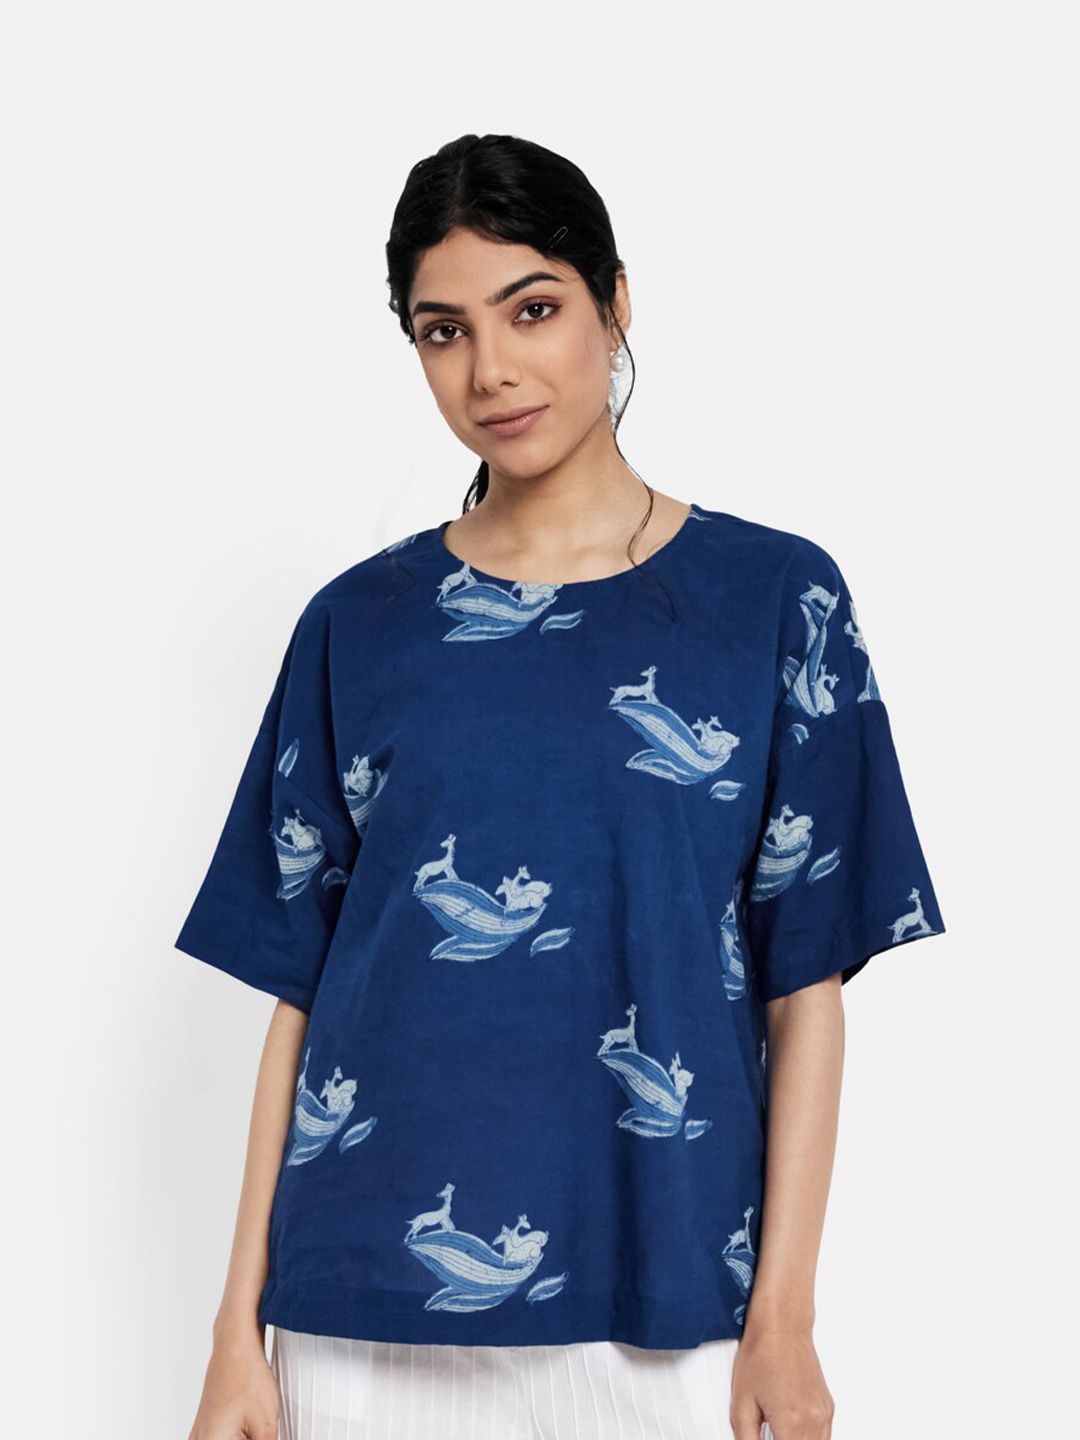 Fabindia Navy Blue Print Extended Sleeves Pure Cotton Top Price in India